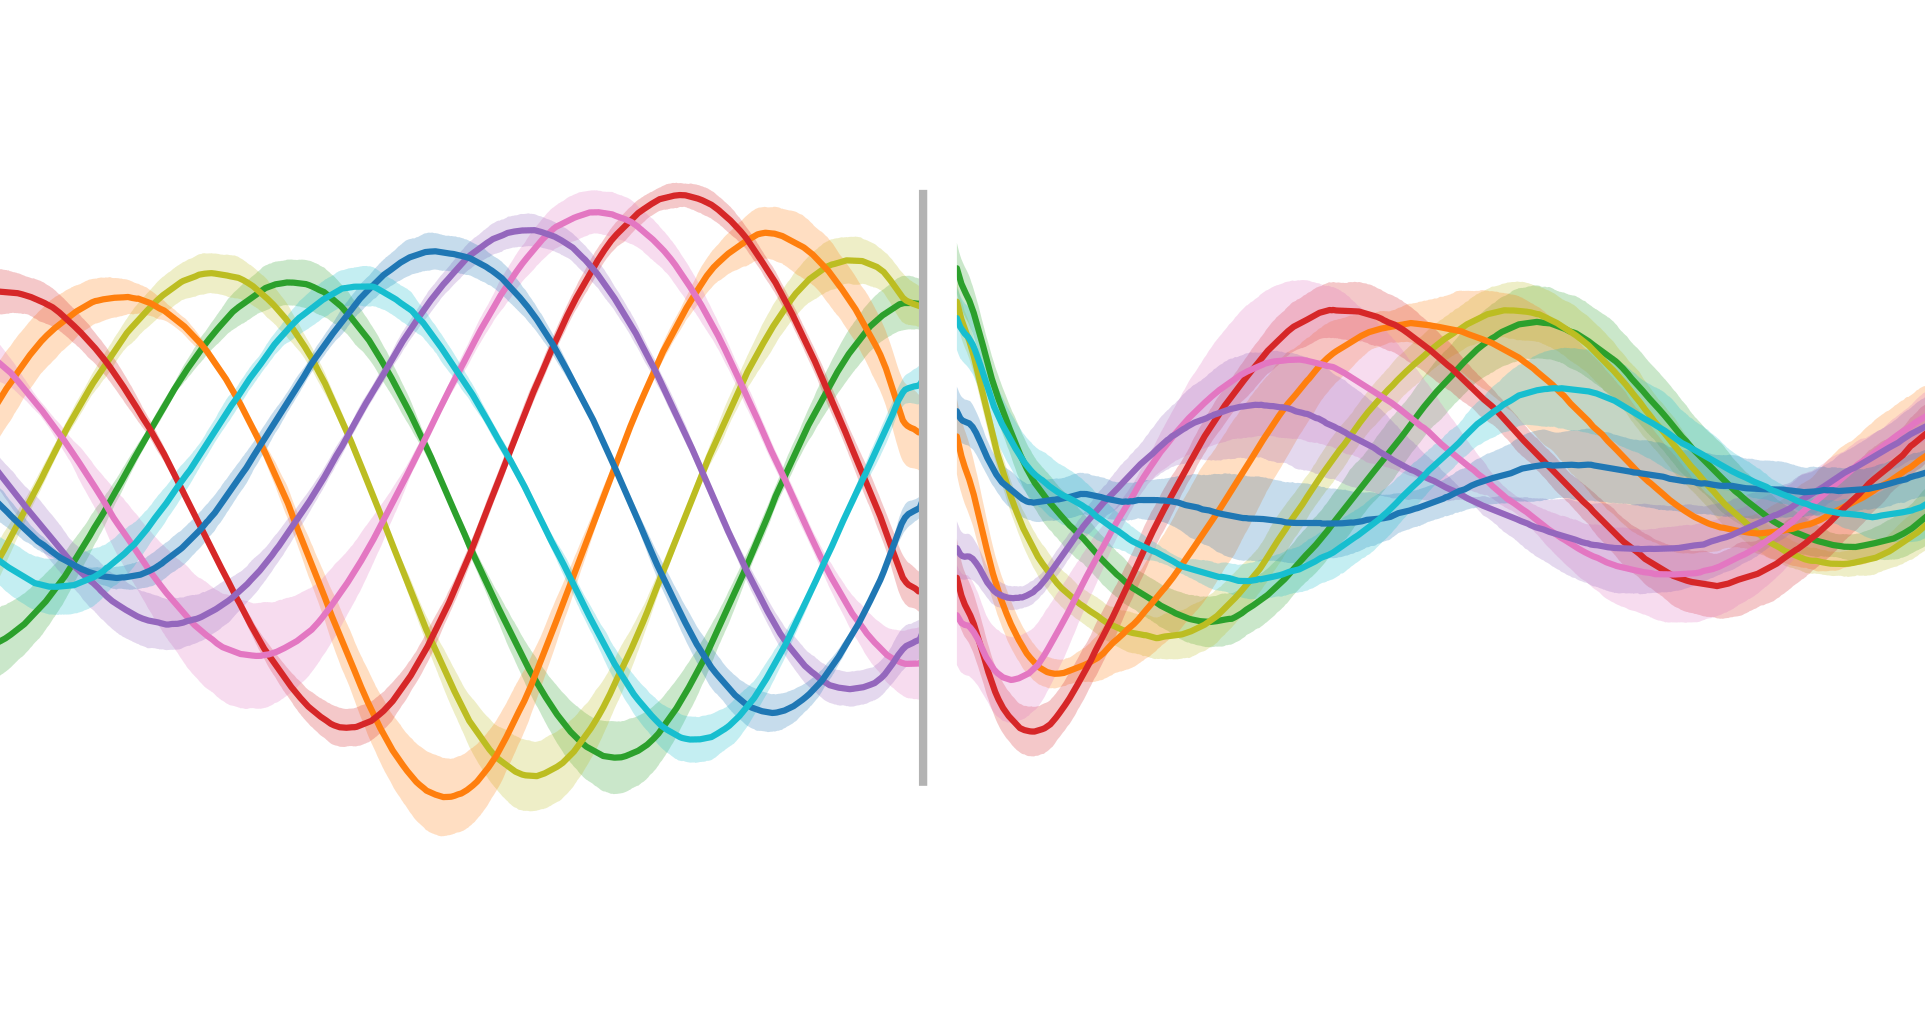 coloured waves of oscillations are layered on top of each other